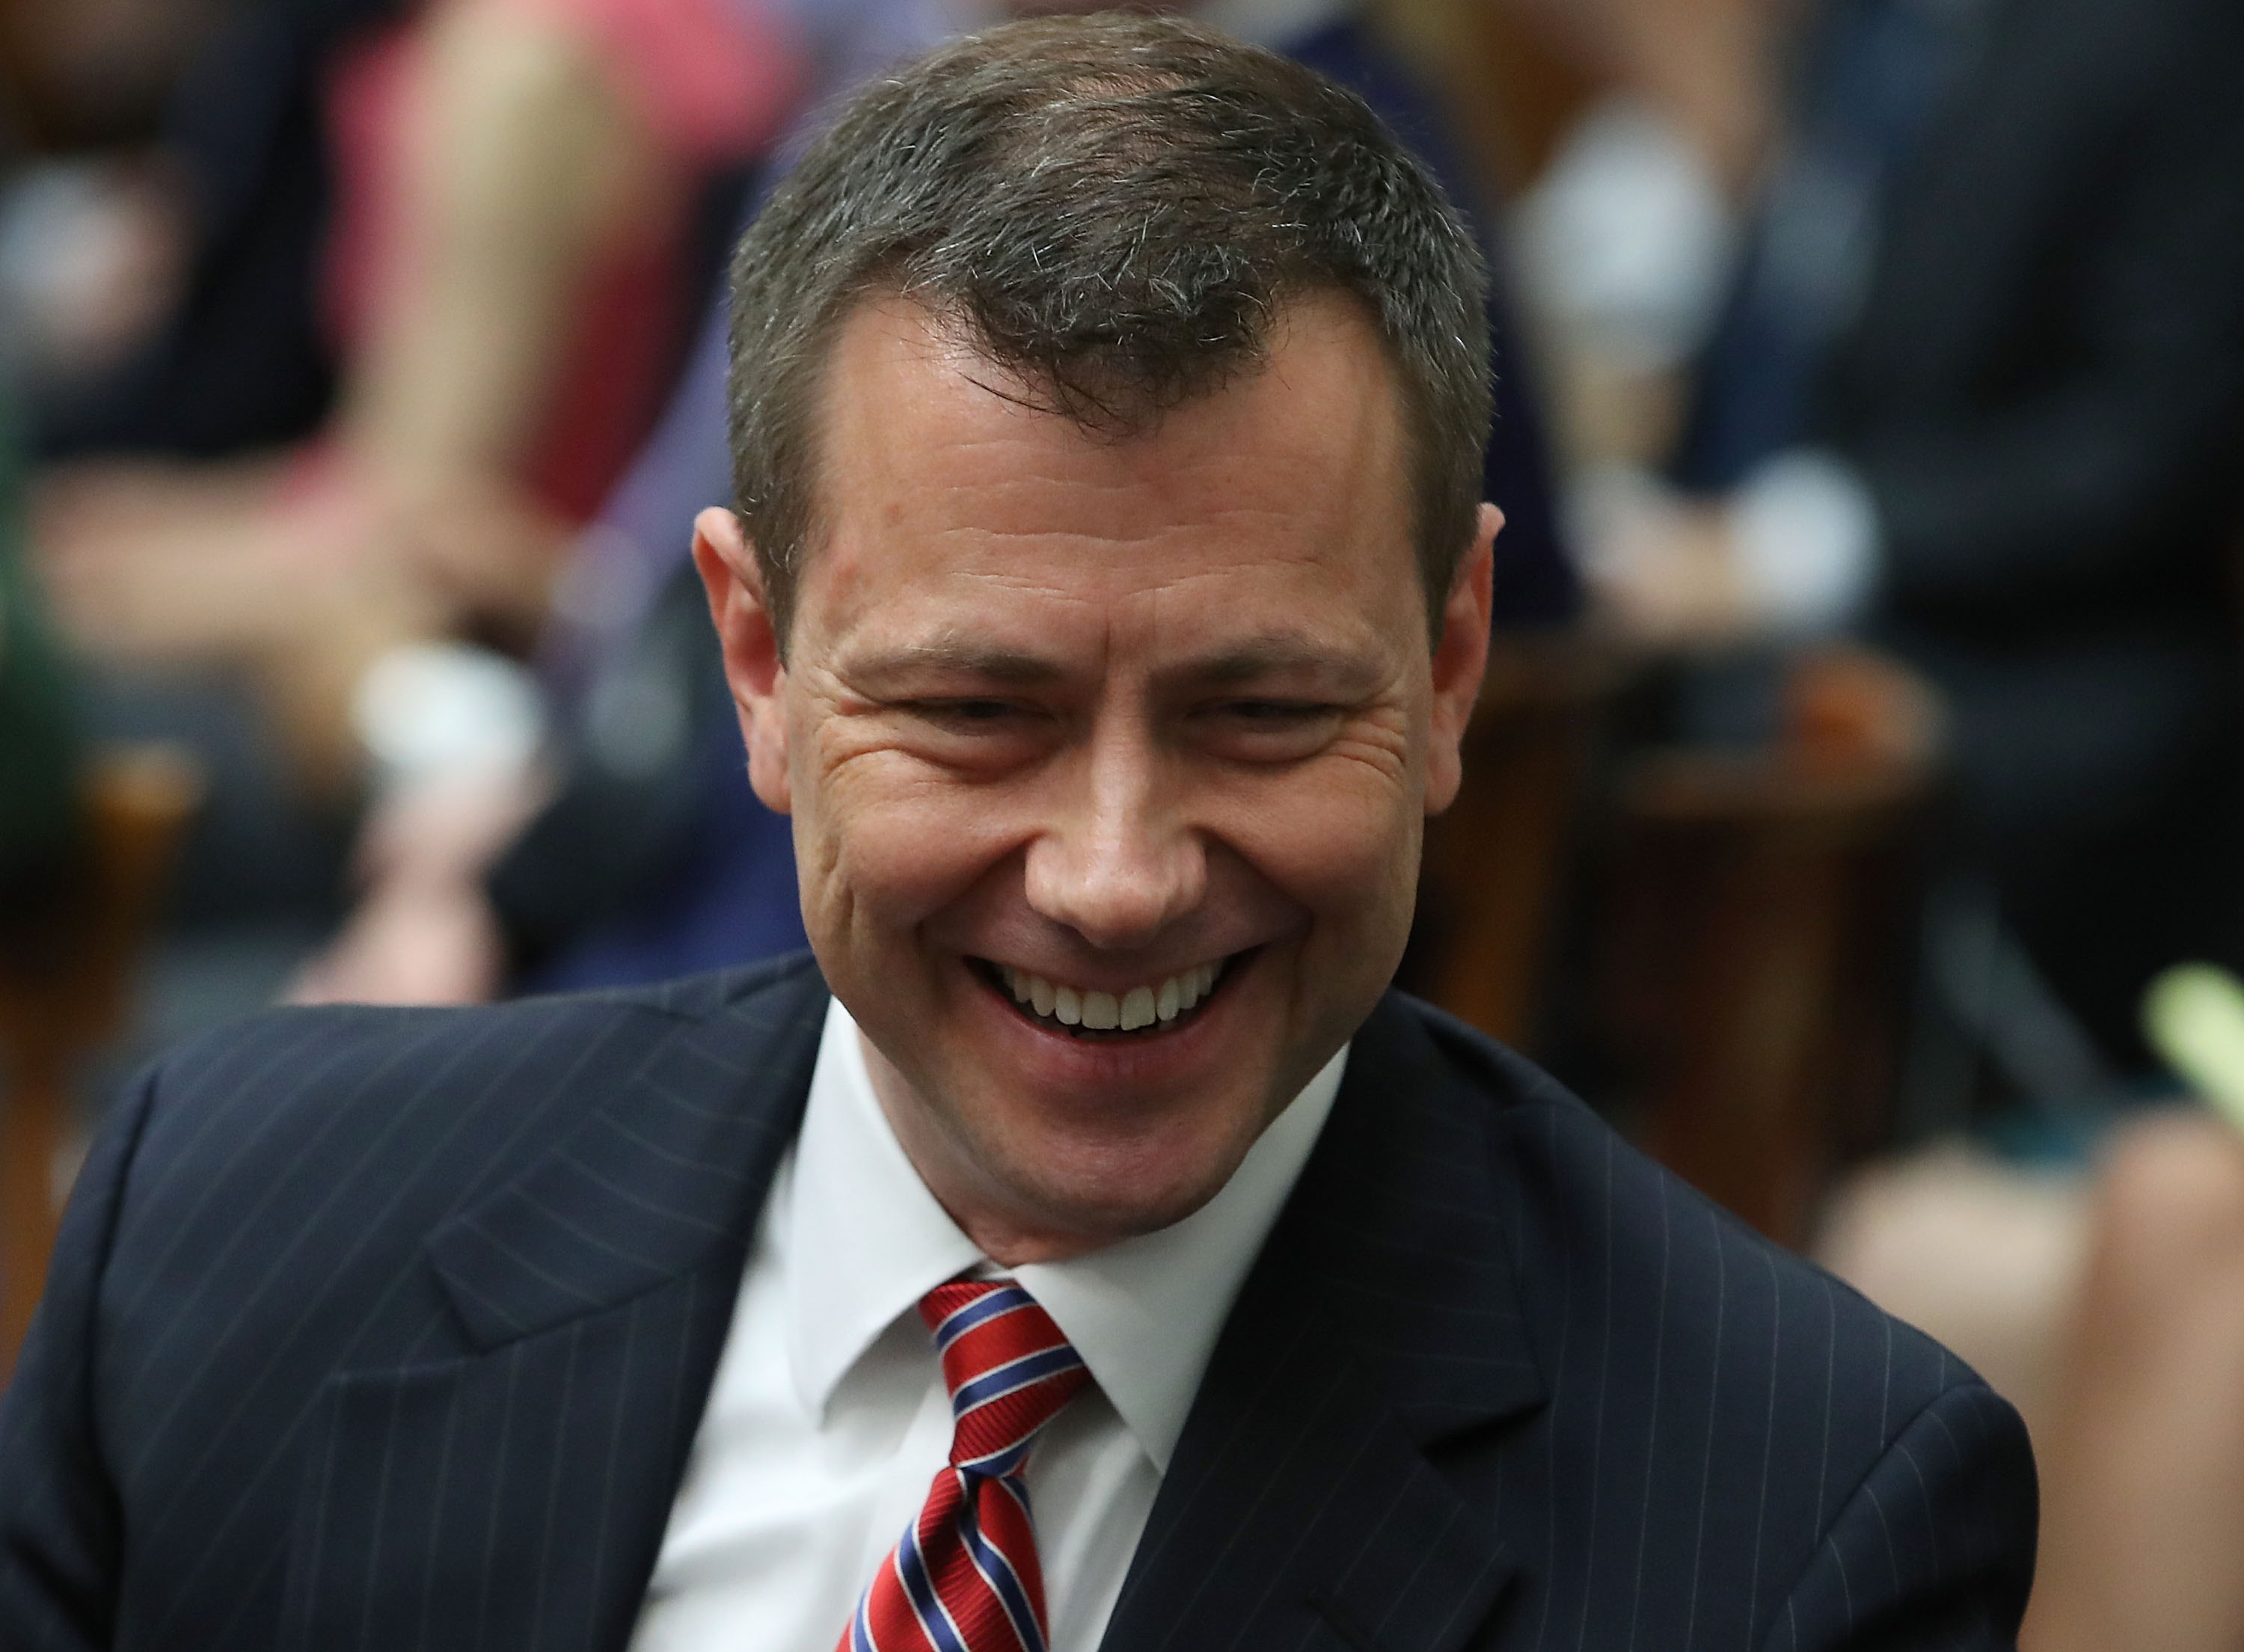 Peter Strzok 5 Fast Facts You Need to Know